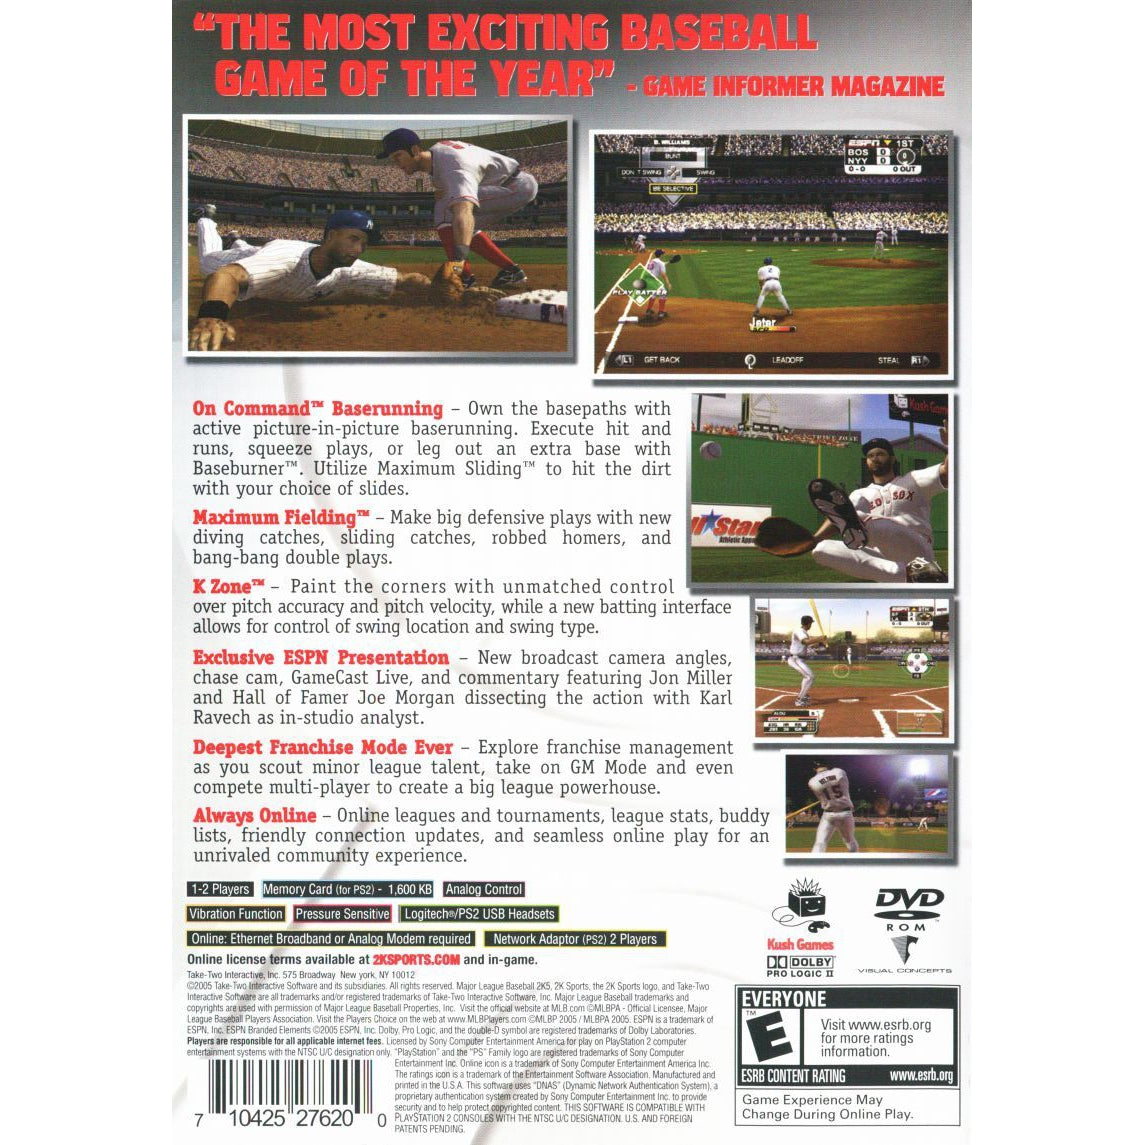 Major League Baseball 2K5 - PlayStation 2 (PS2) Game Complete - YourGamingShop.com - Buy, Sell, Trade Video Games Online. 120 Day Warranty. Satisfaction Guaranteed.